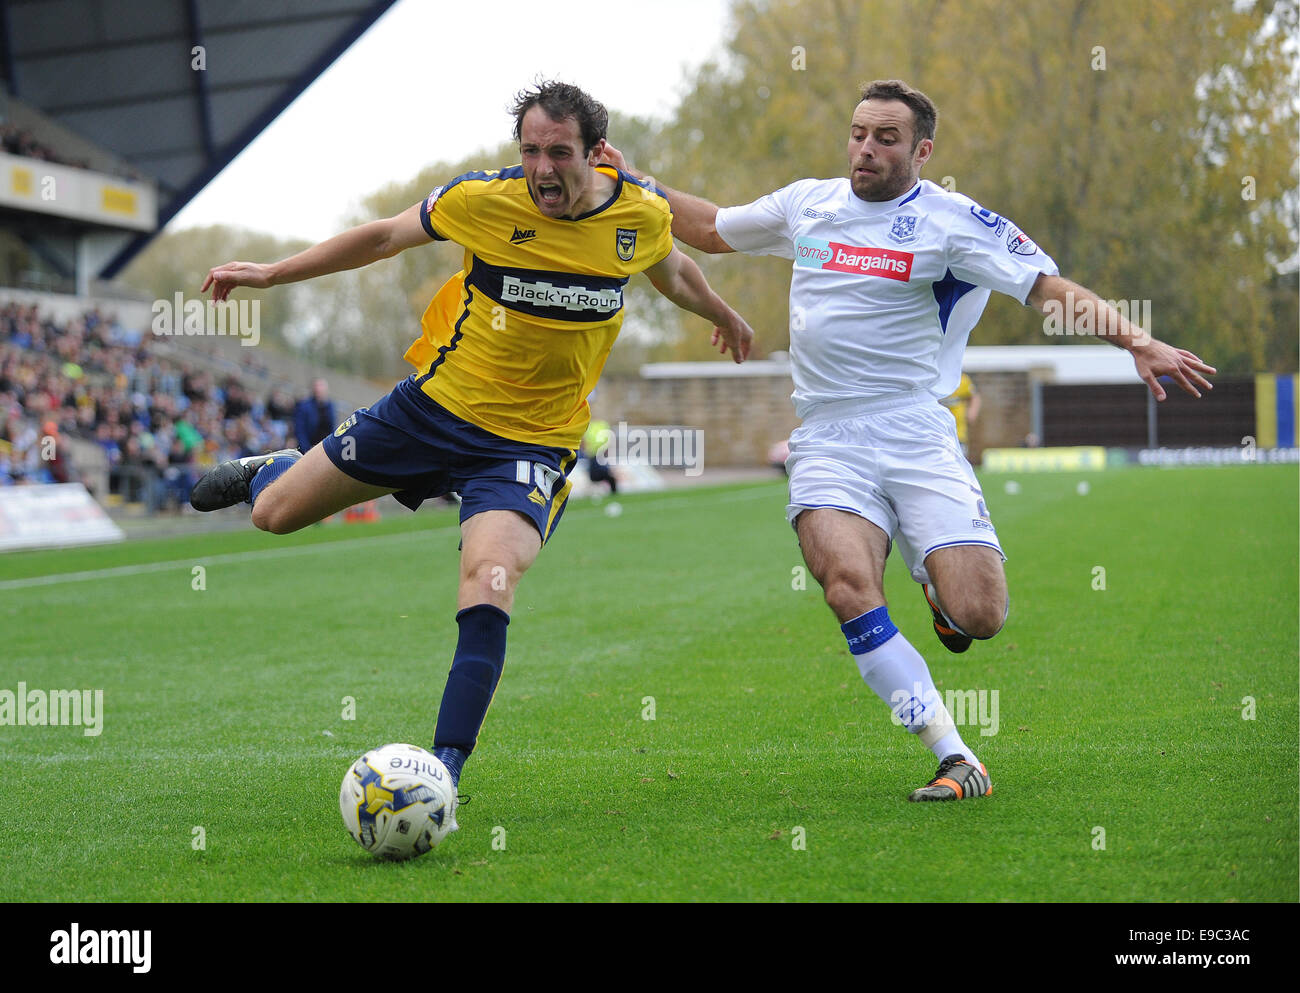 DATE: 18.10.2014 LOCATION: Oxford CATCHLINE: UNITED v Tranmere PRIORITY: DPS FOR: Sport, David Pritchard. Sky Bet League 2: Oxford United v Tranmere Rovers at the Kassam Stadium. Danny Hylton battles it out with Tranmere's Danny Holmes who was eventually Stock Photo